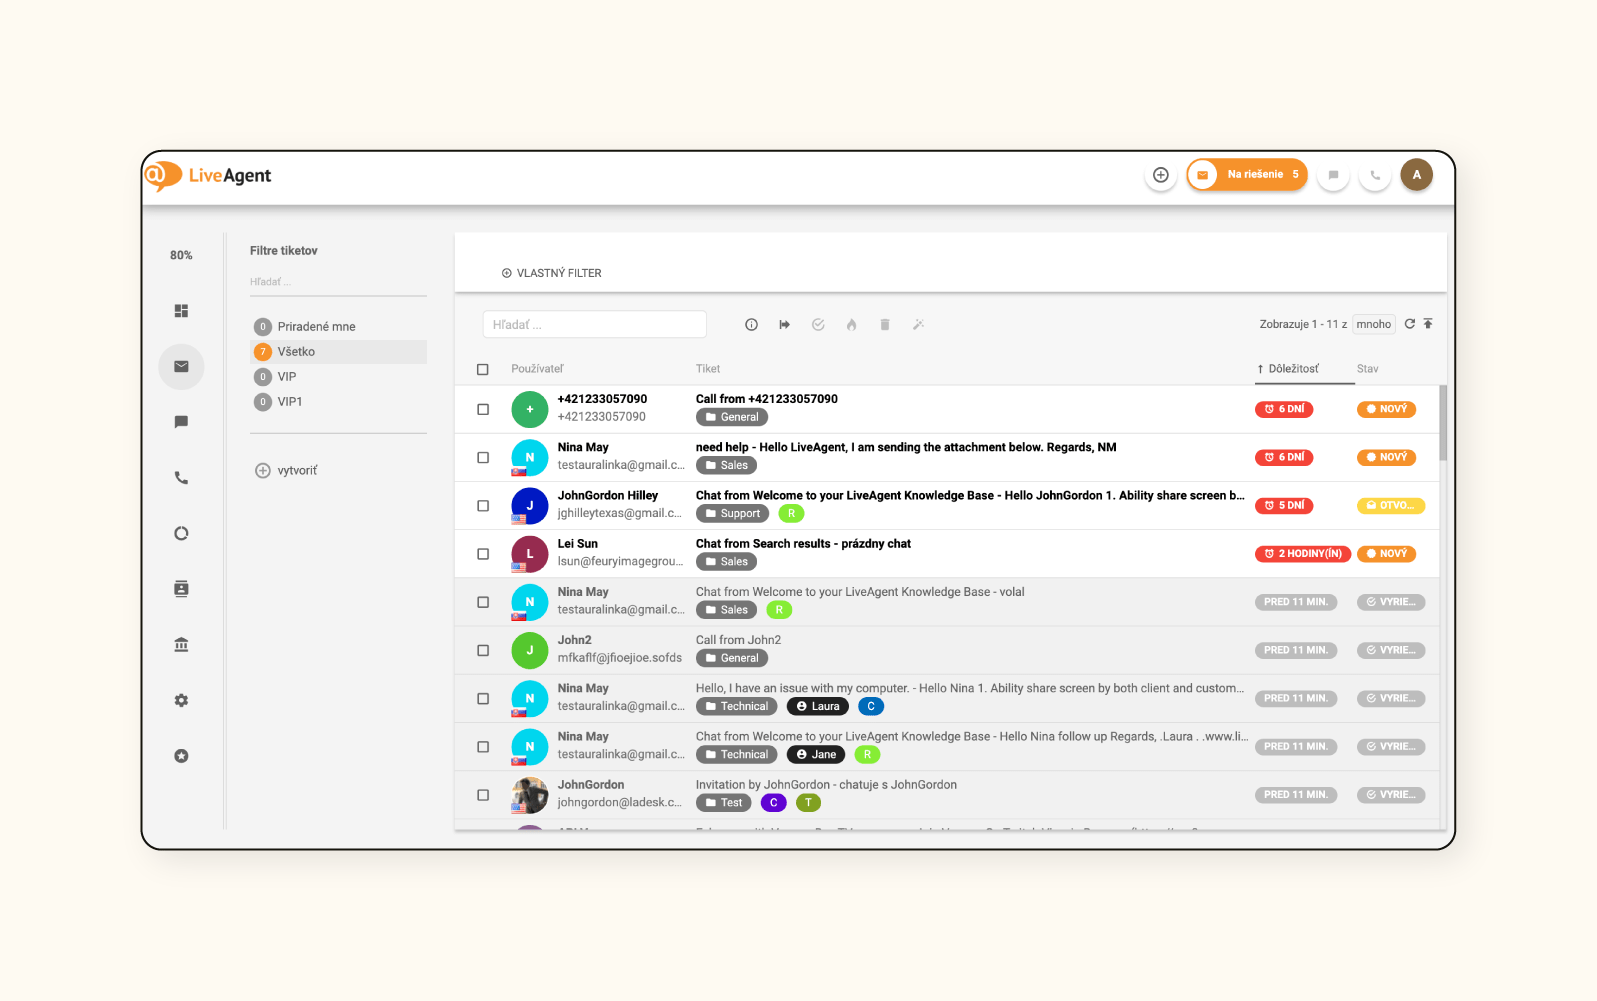 A screenshot shows the ticketing system for customer support from LiveAgent.